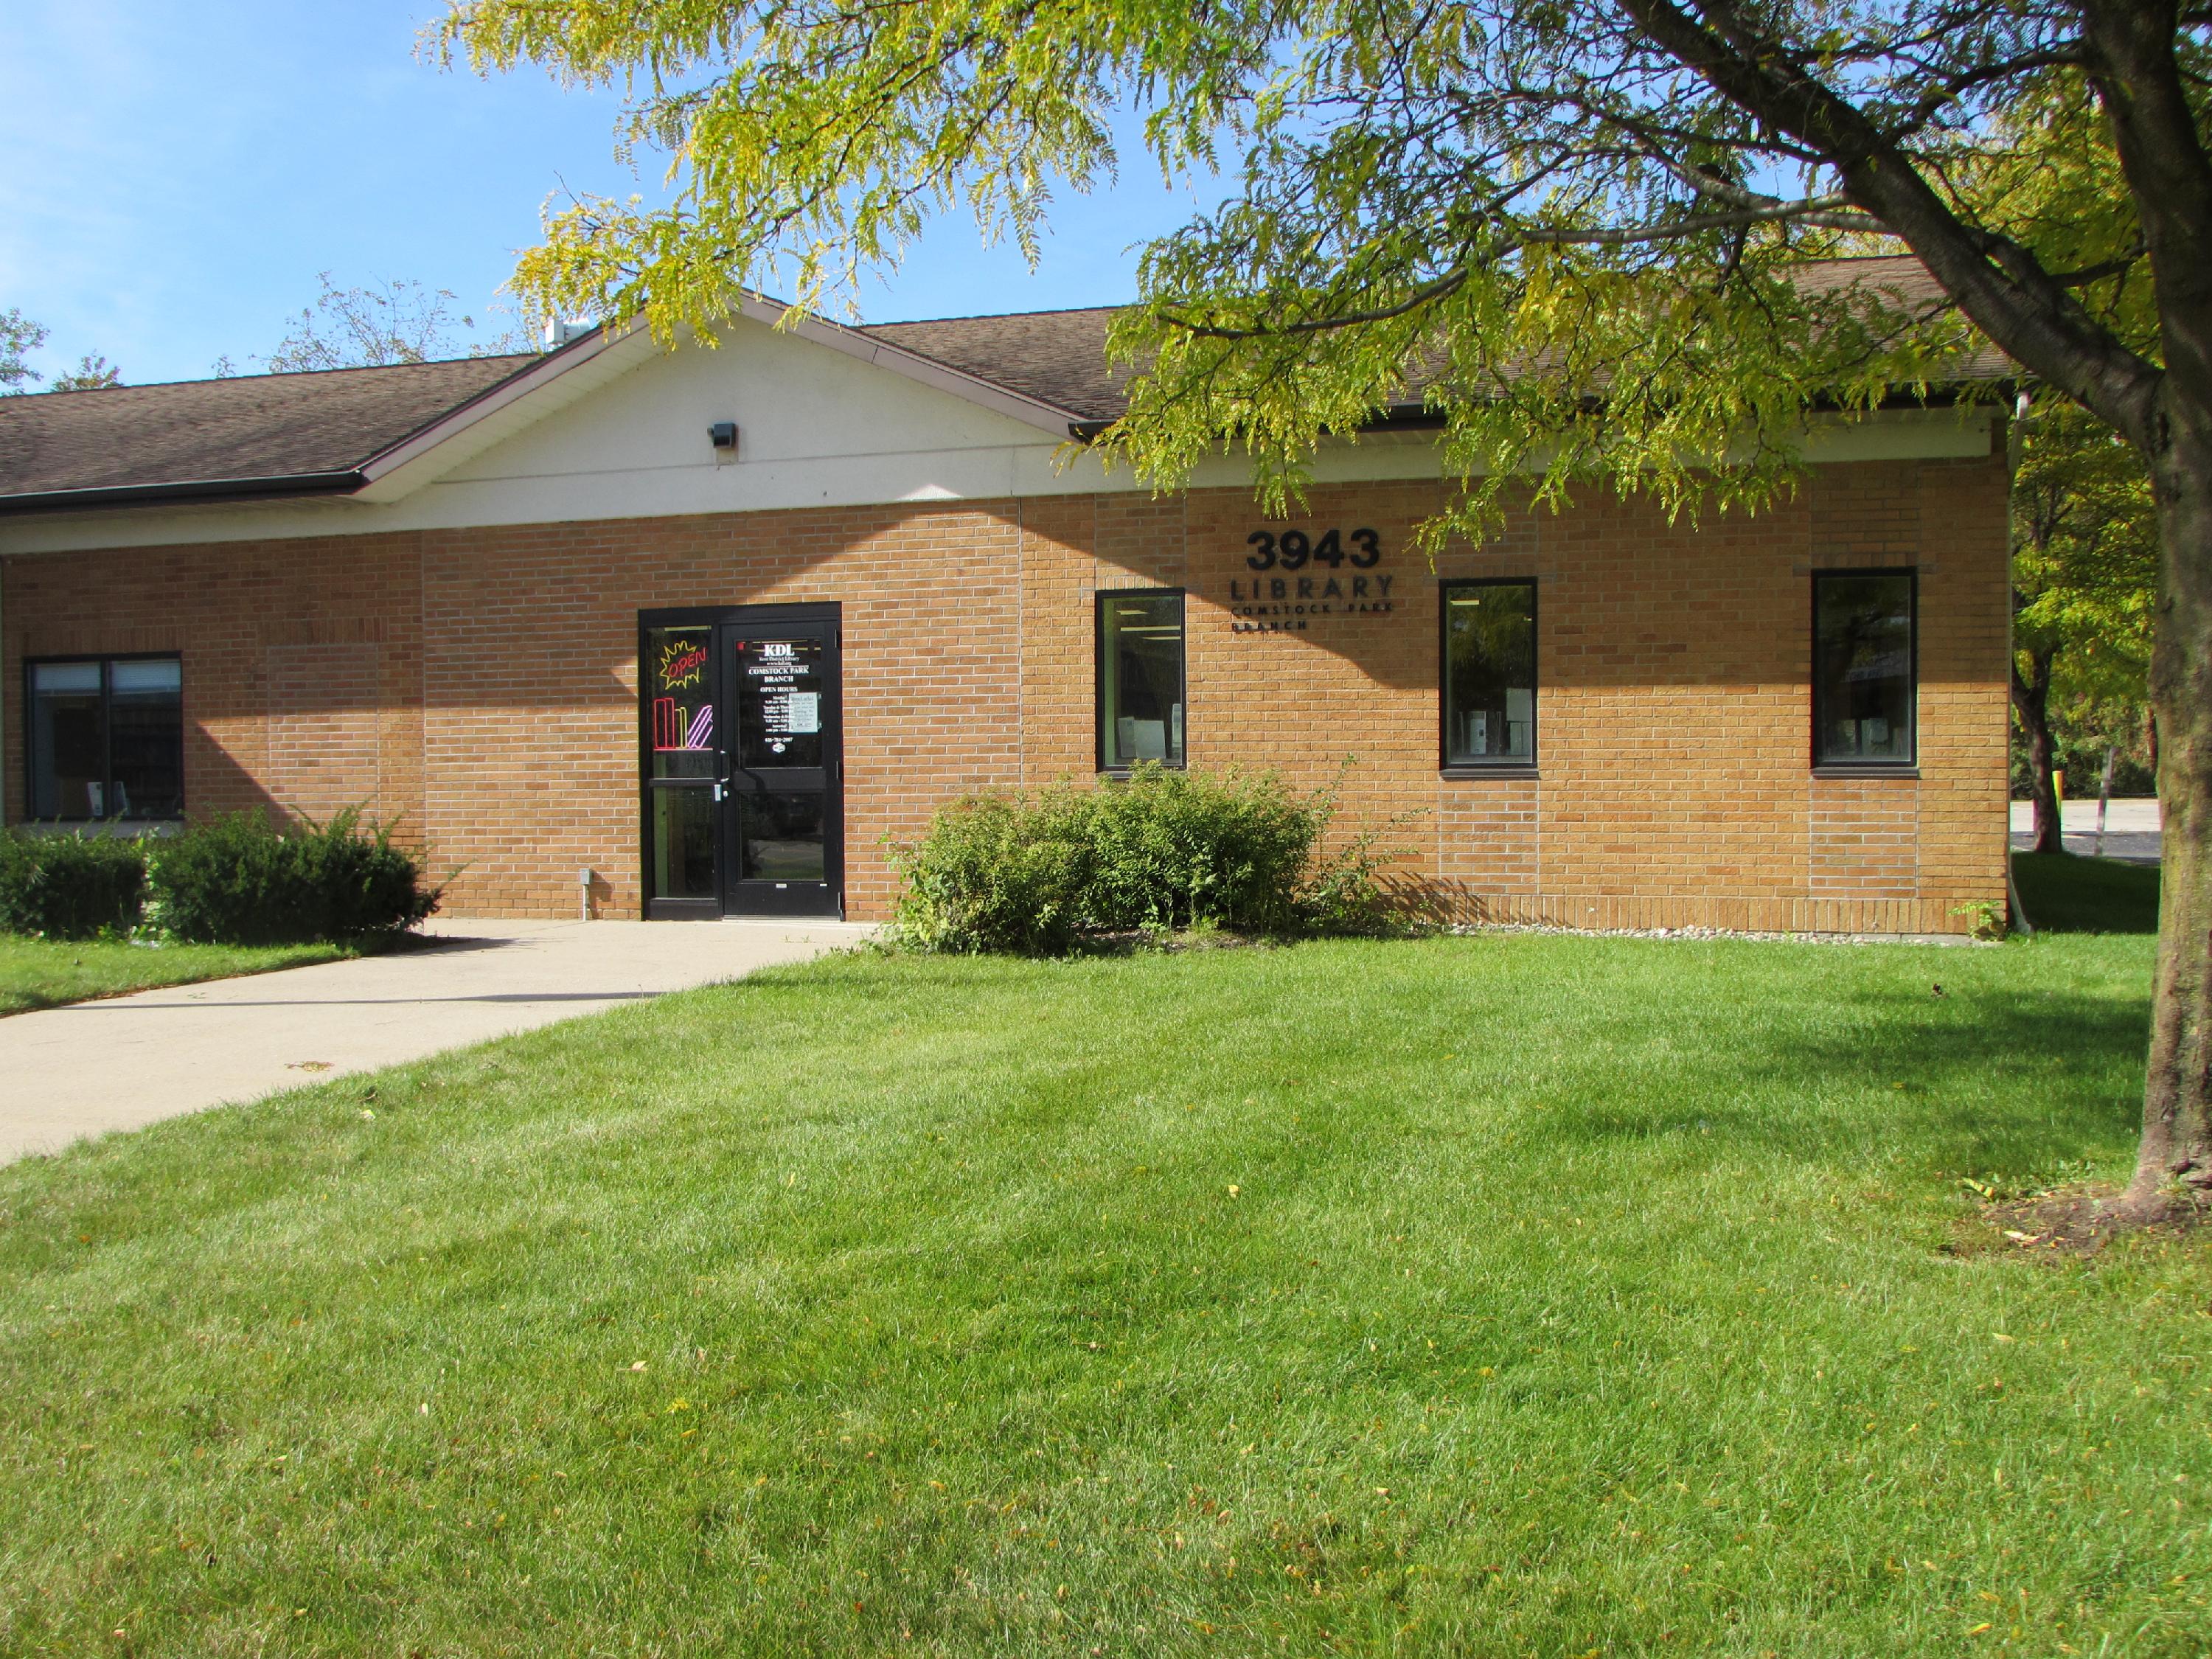 Comstock Park library